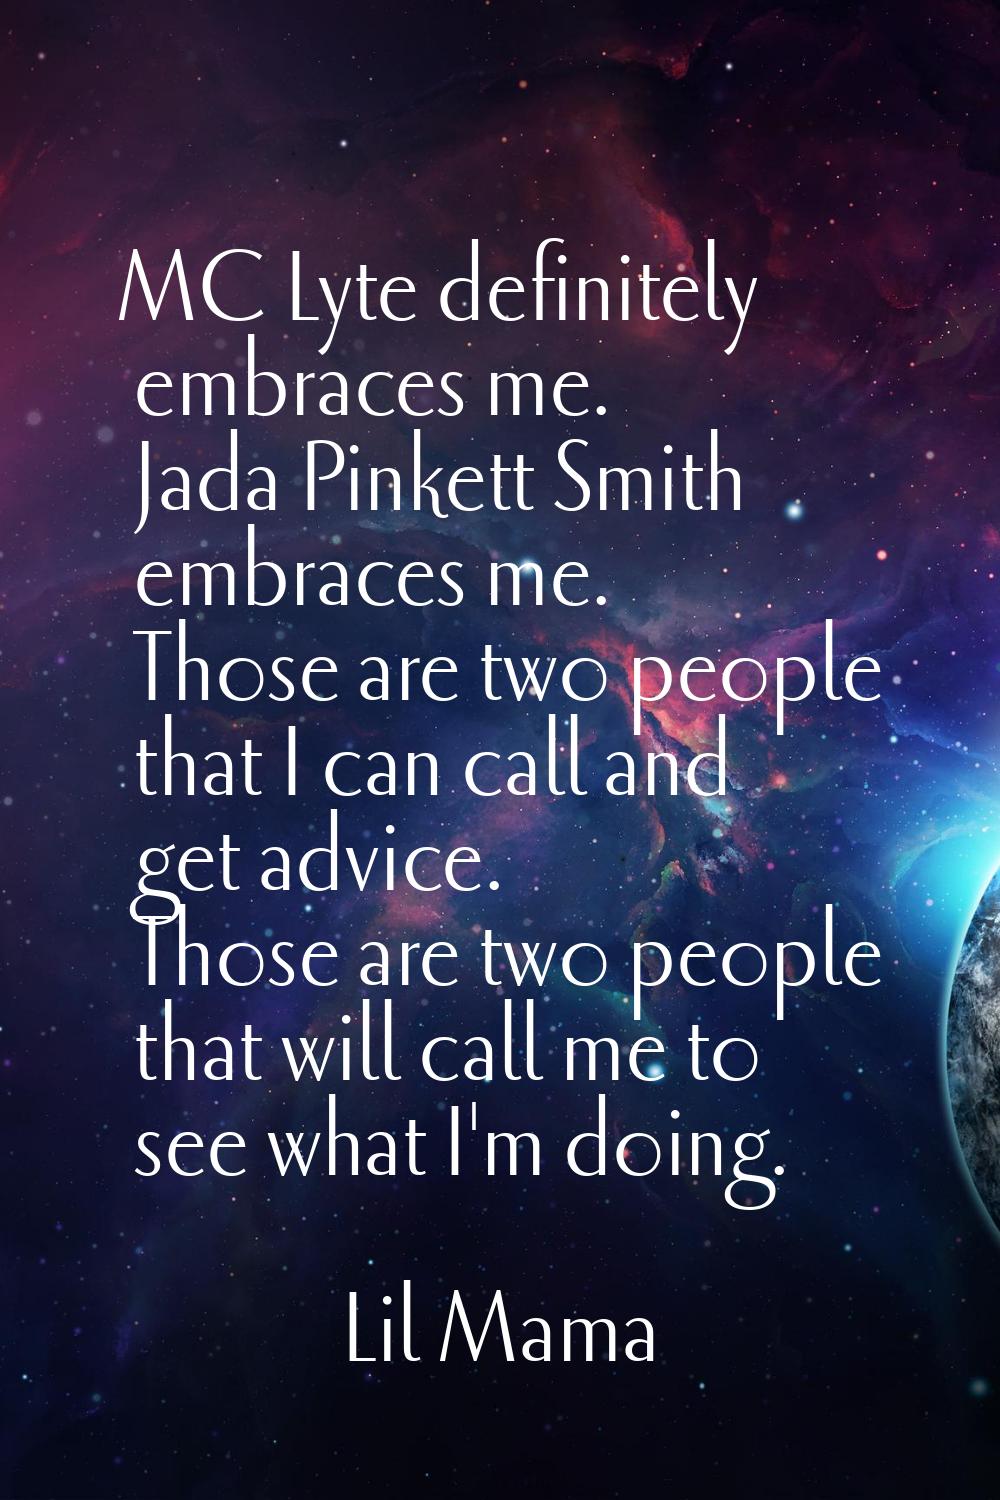 MC Lyte definitely embraces me. Jada Pinkett Smith embraces me. Those are two people that I can cal